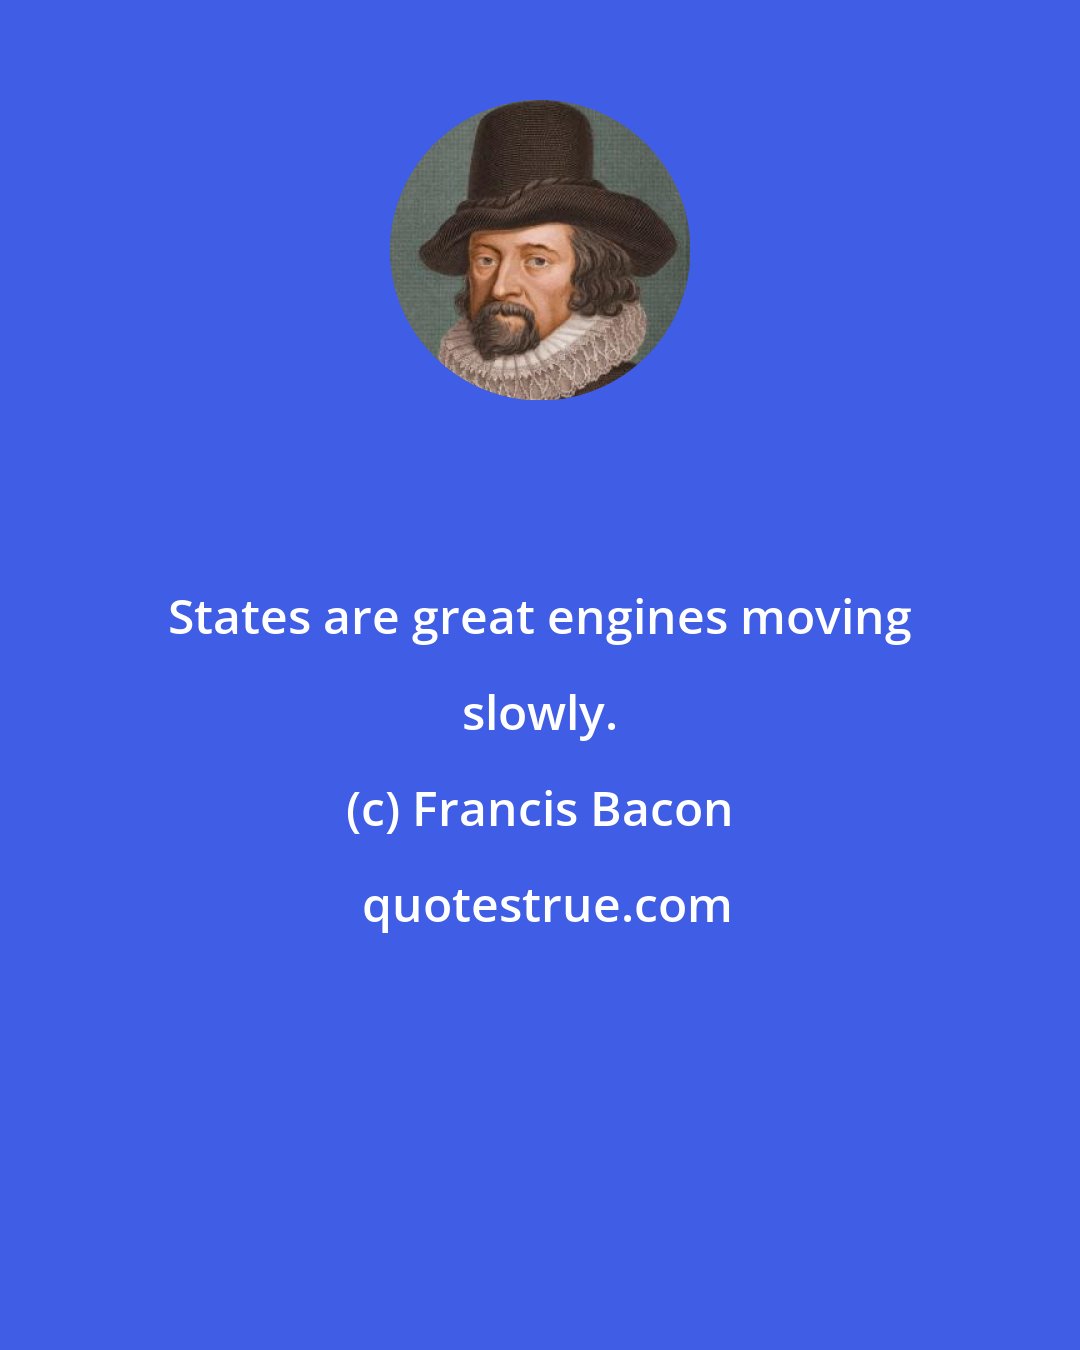 Francis Bacon: States are great engines moving slowly.